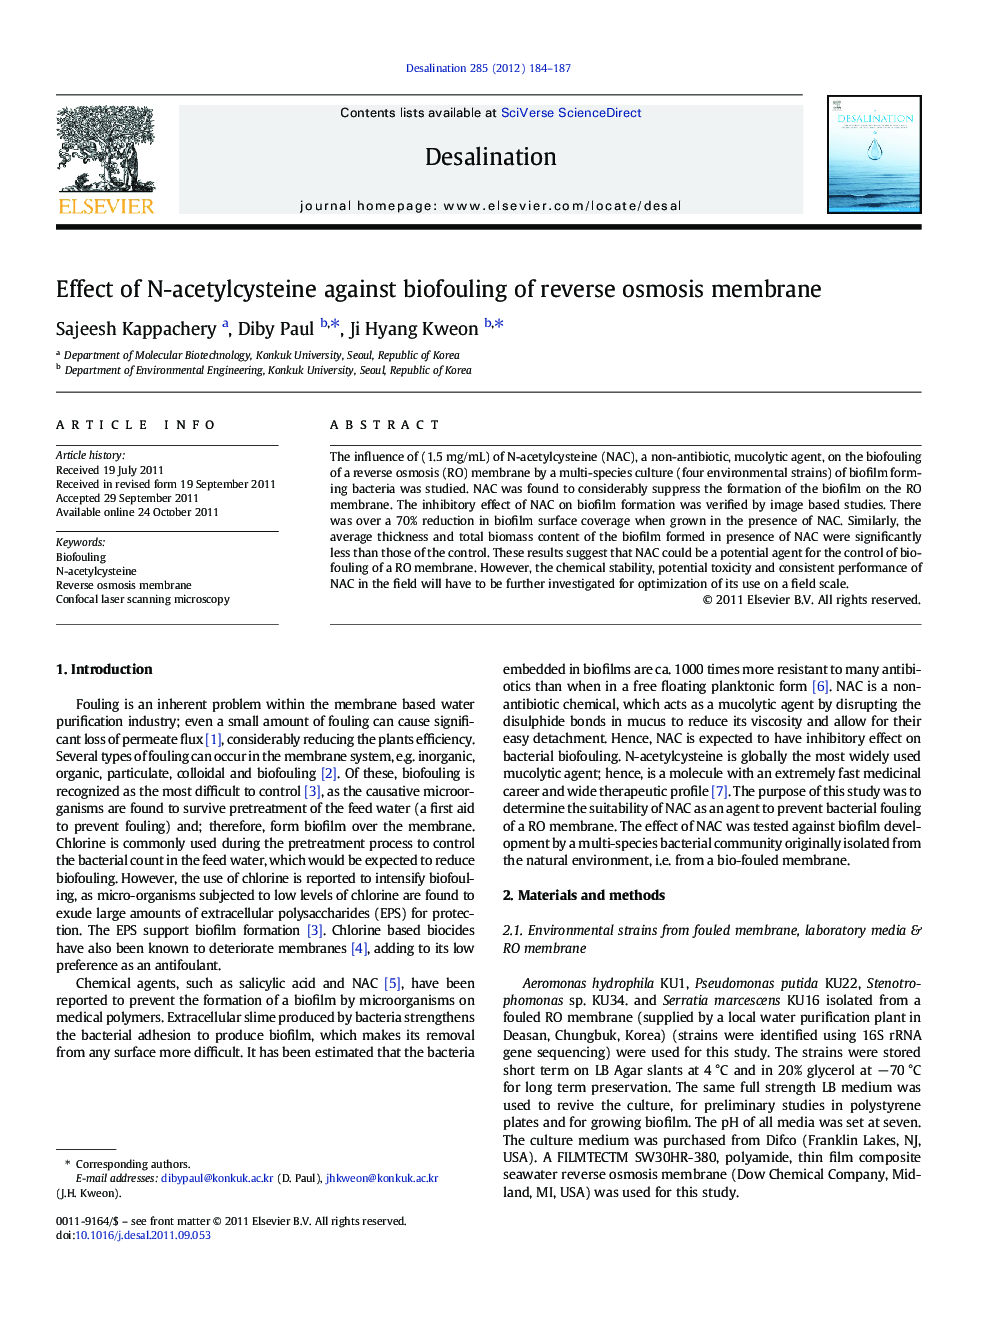 Effect of N-acetylcysteine against biofouling of reverse osmosis membrane